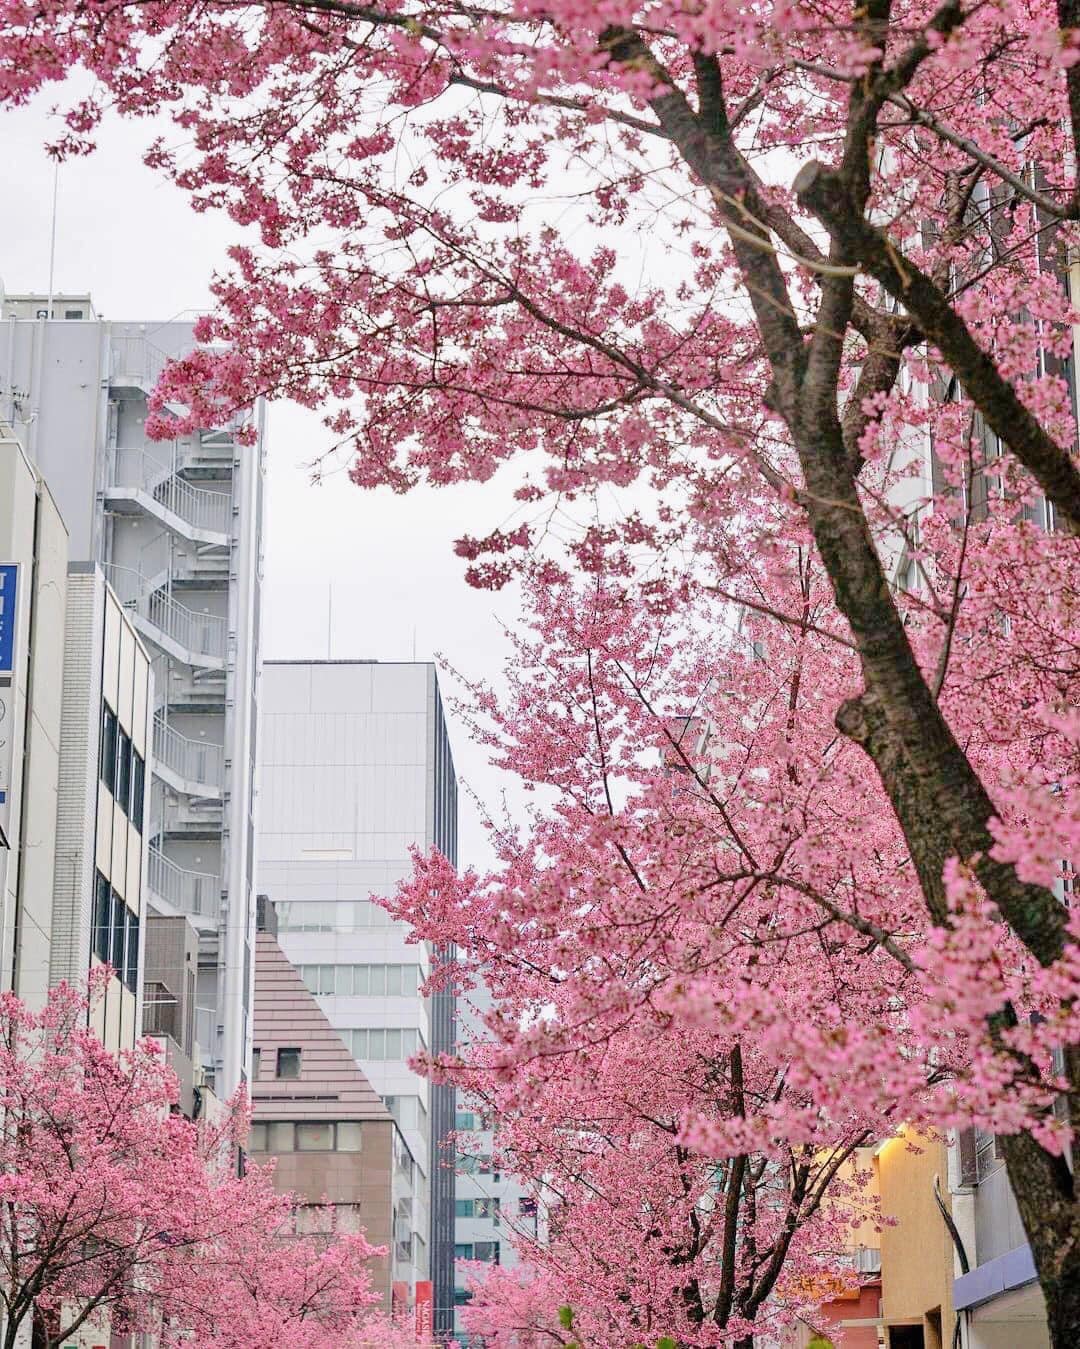 Cherry blossom in Ginza (Tokyo) (Photo: Truong Giang Nguyen)